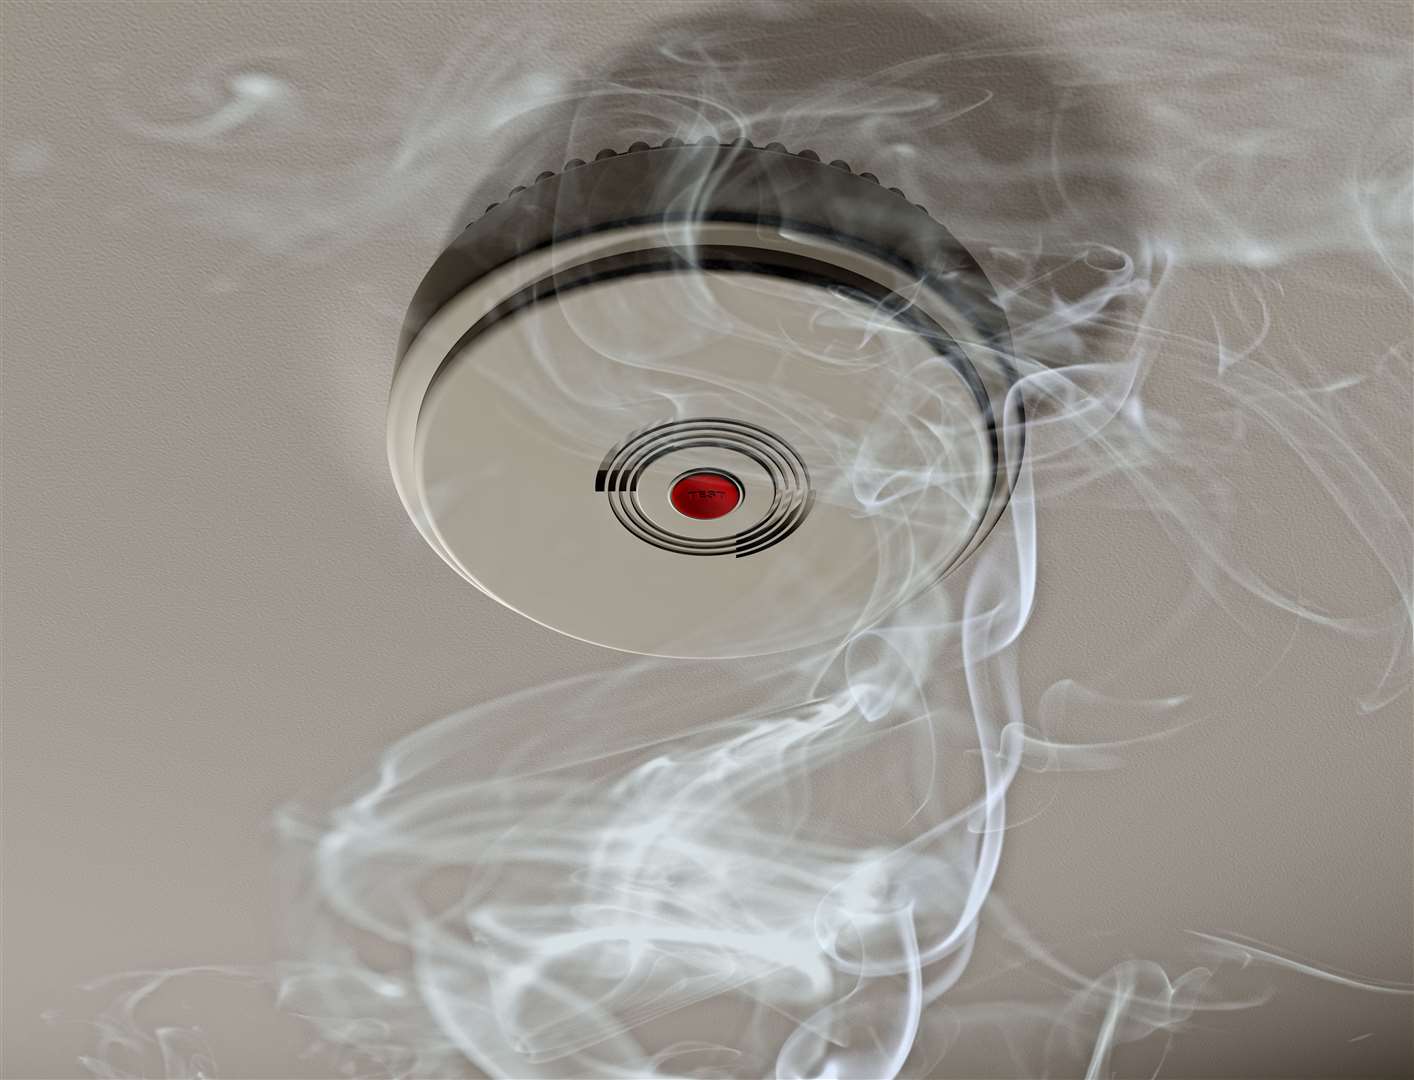 Illustration of a smoke alarm sounding off in a smoky room.